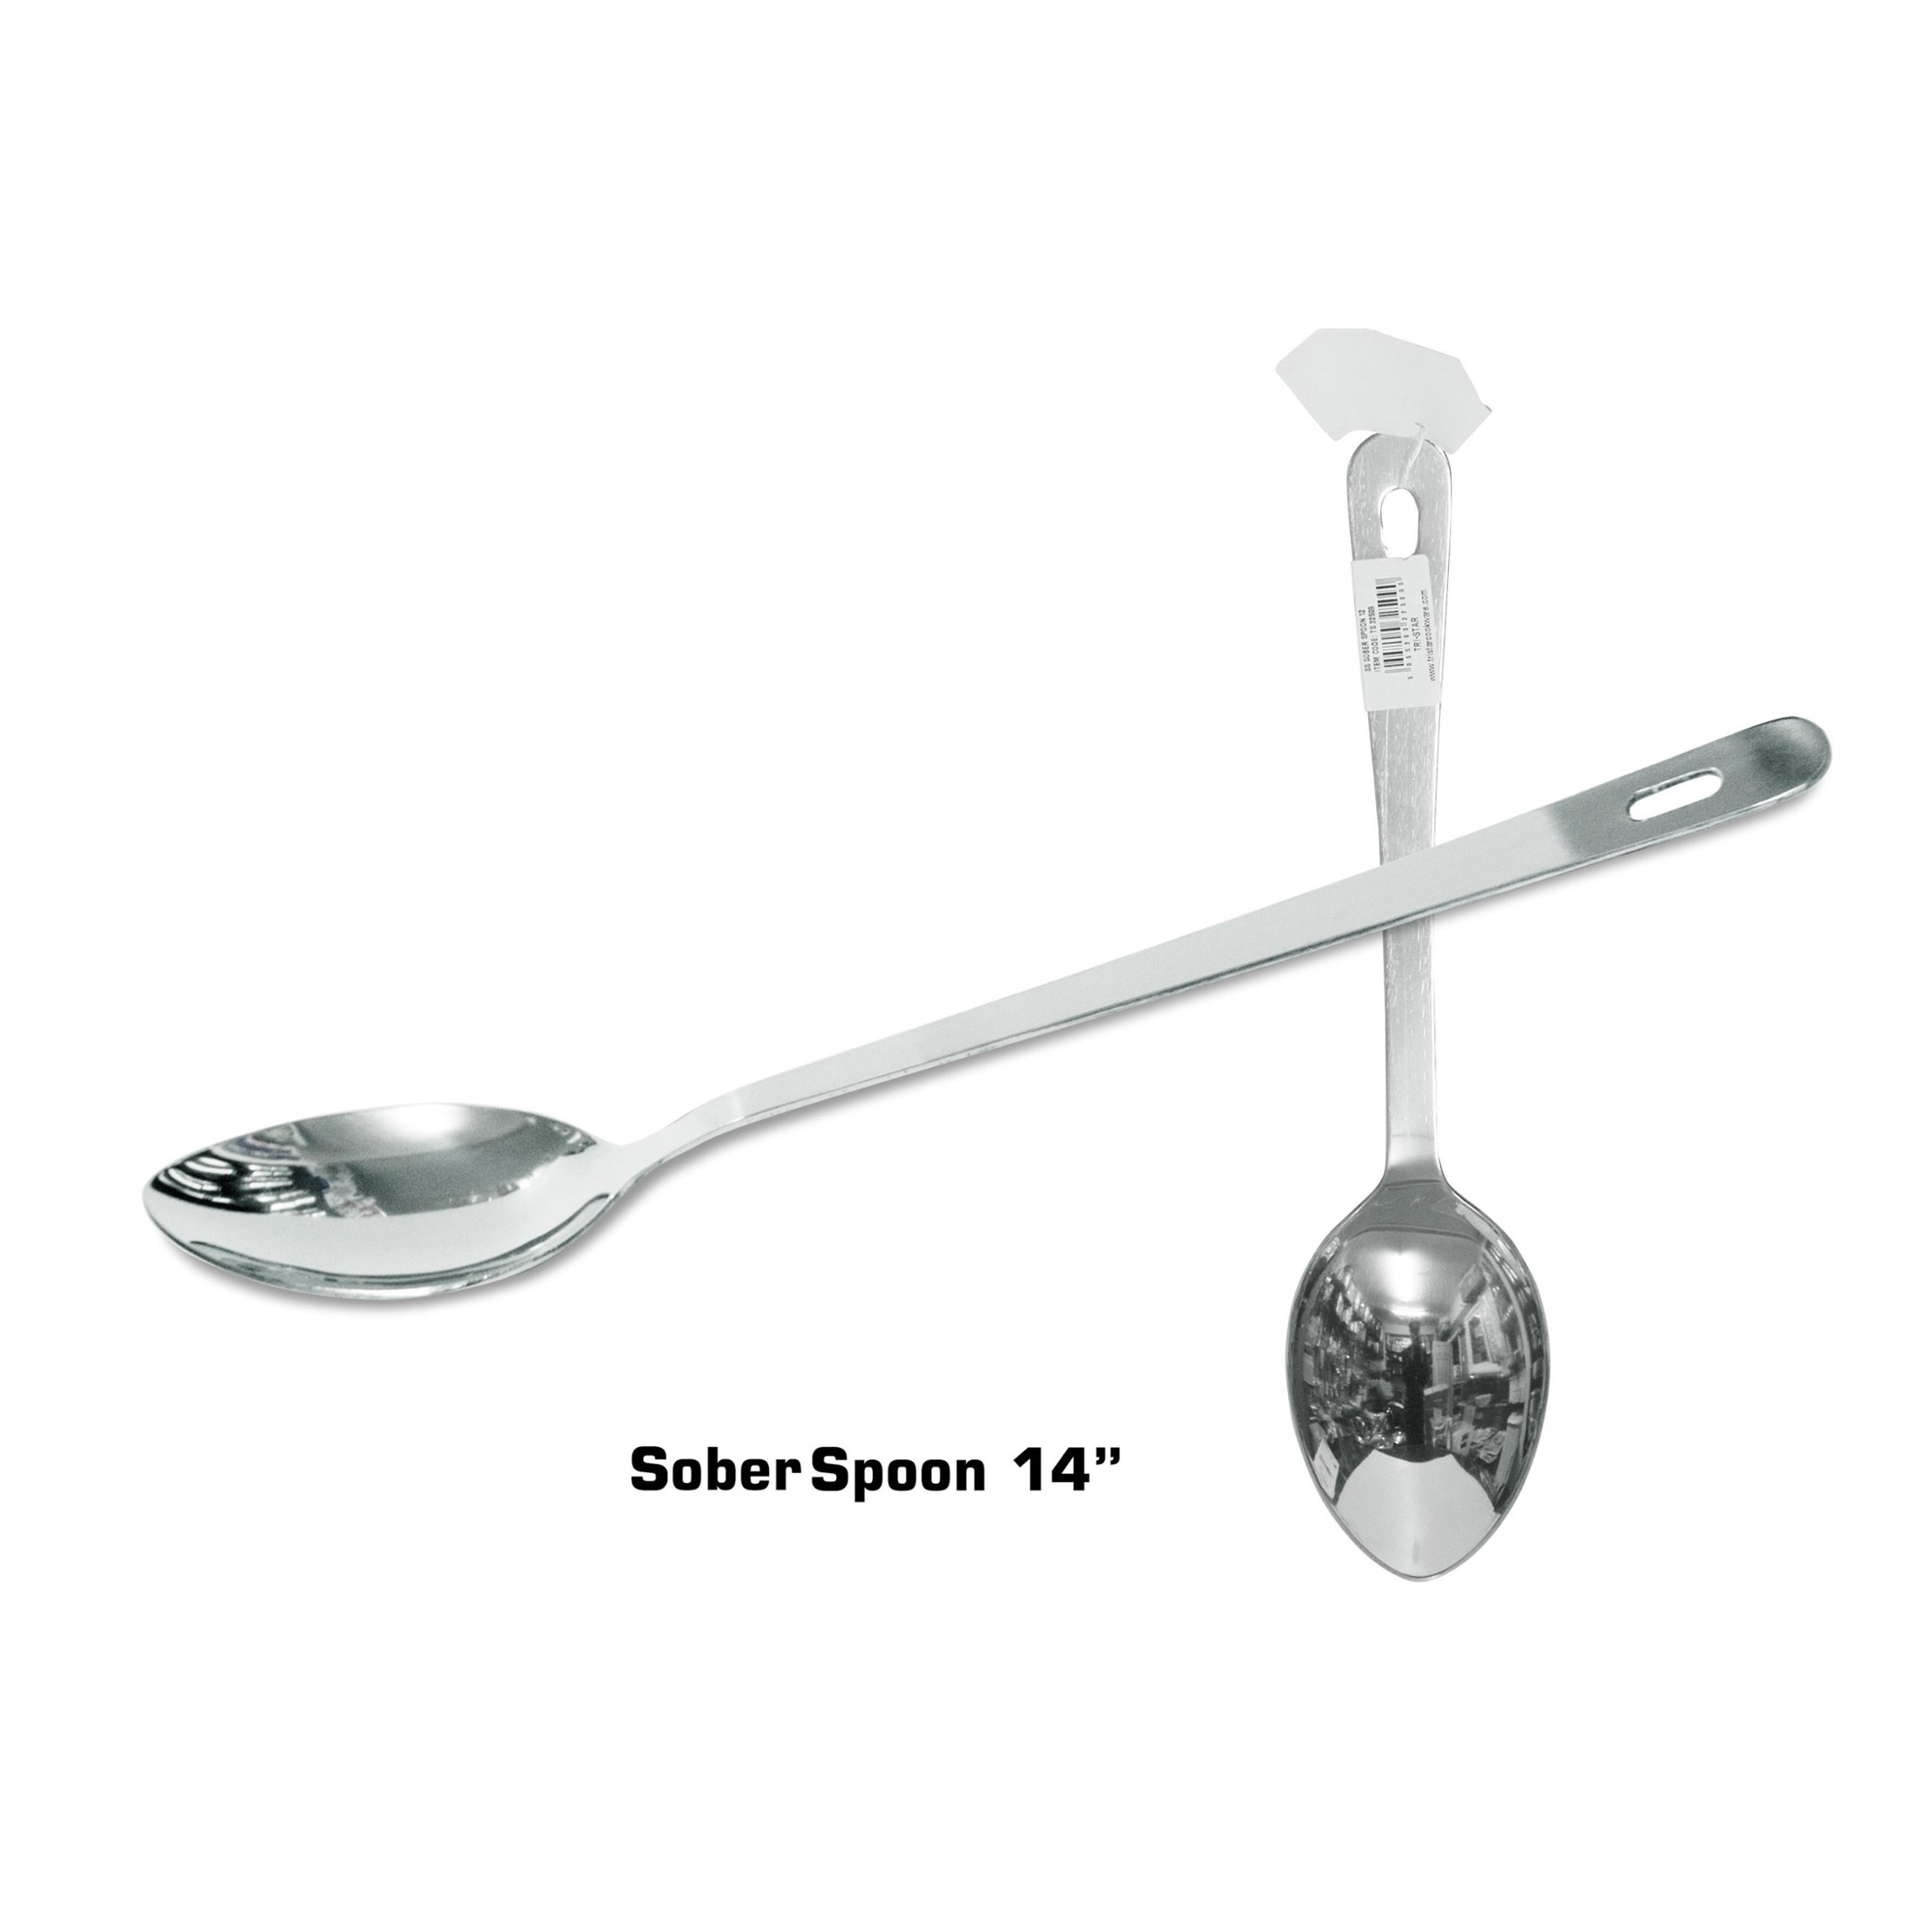 Stainless Steel Sober Spoon - 14 Inches